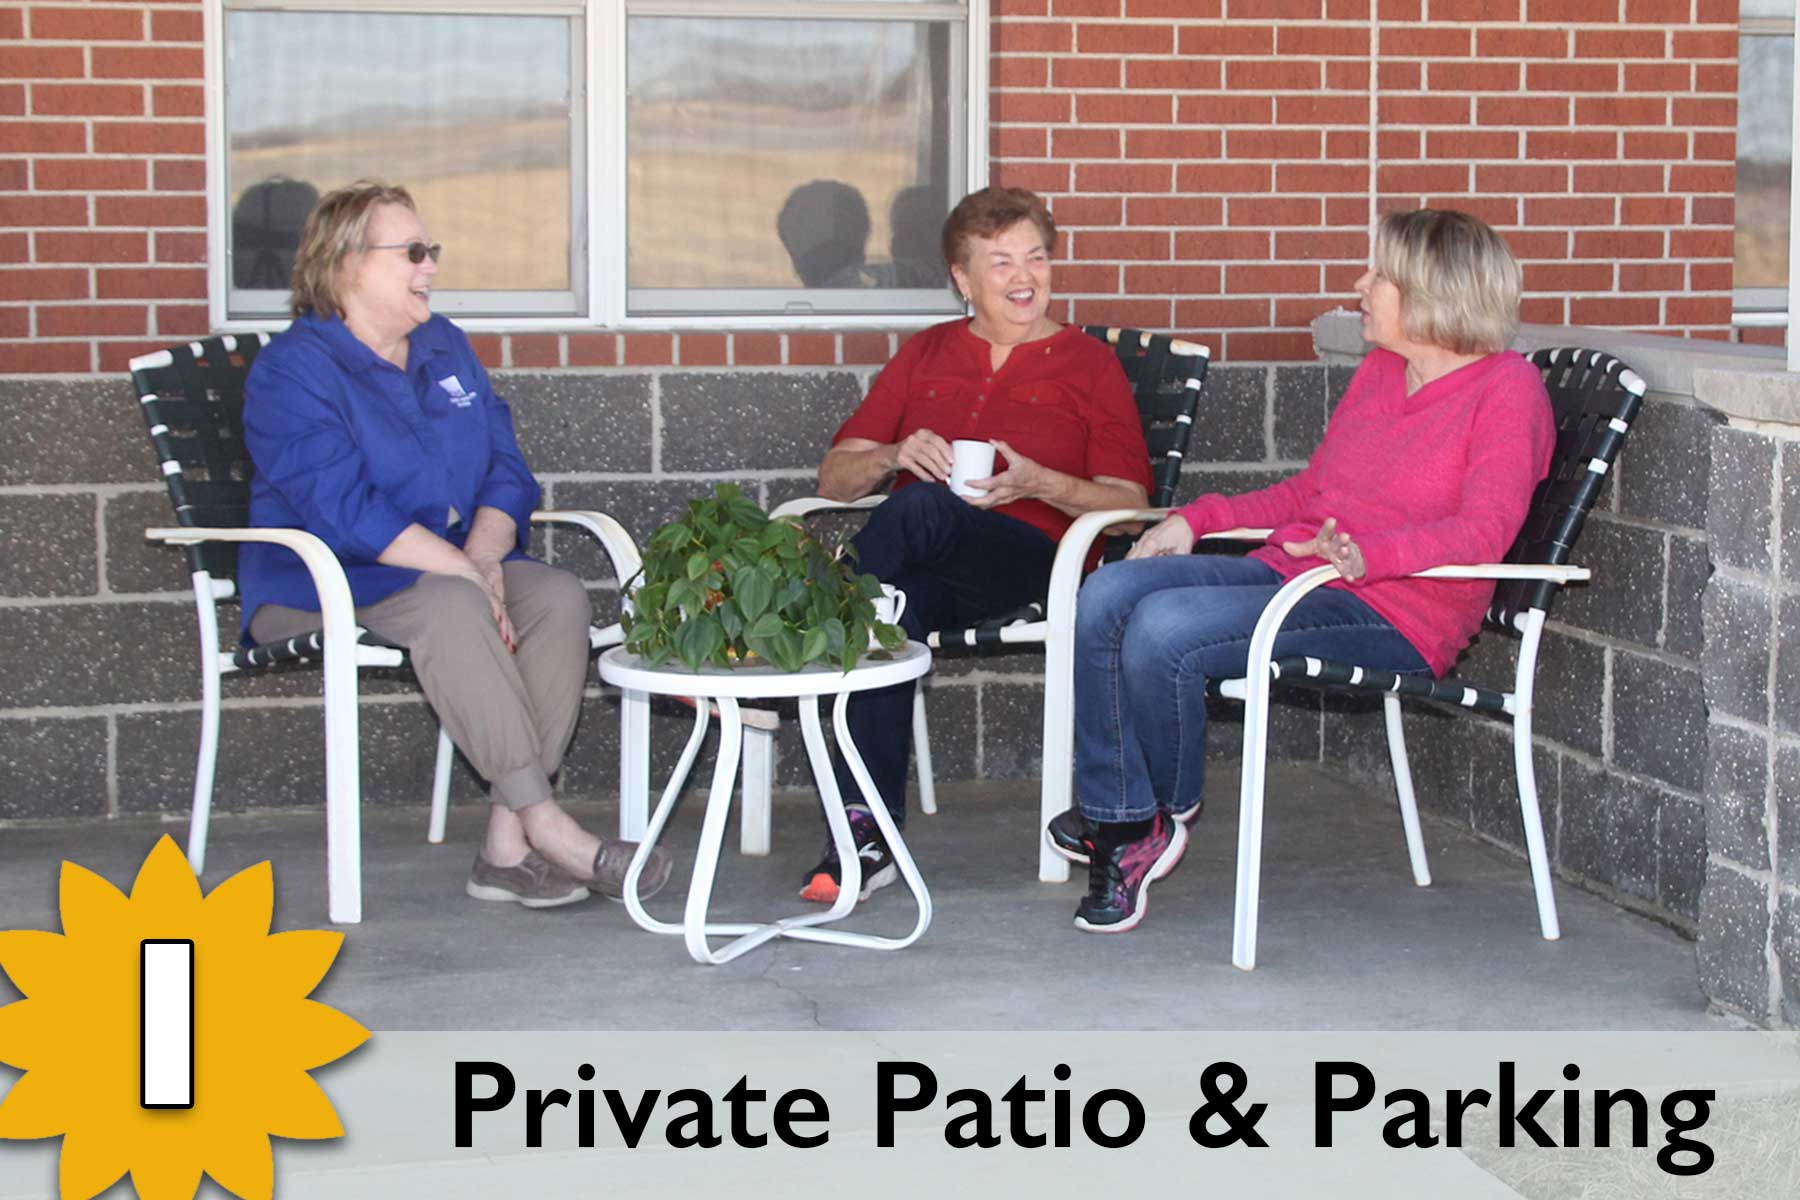 Enjoy time on your private patio